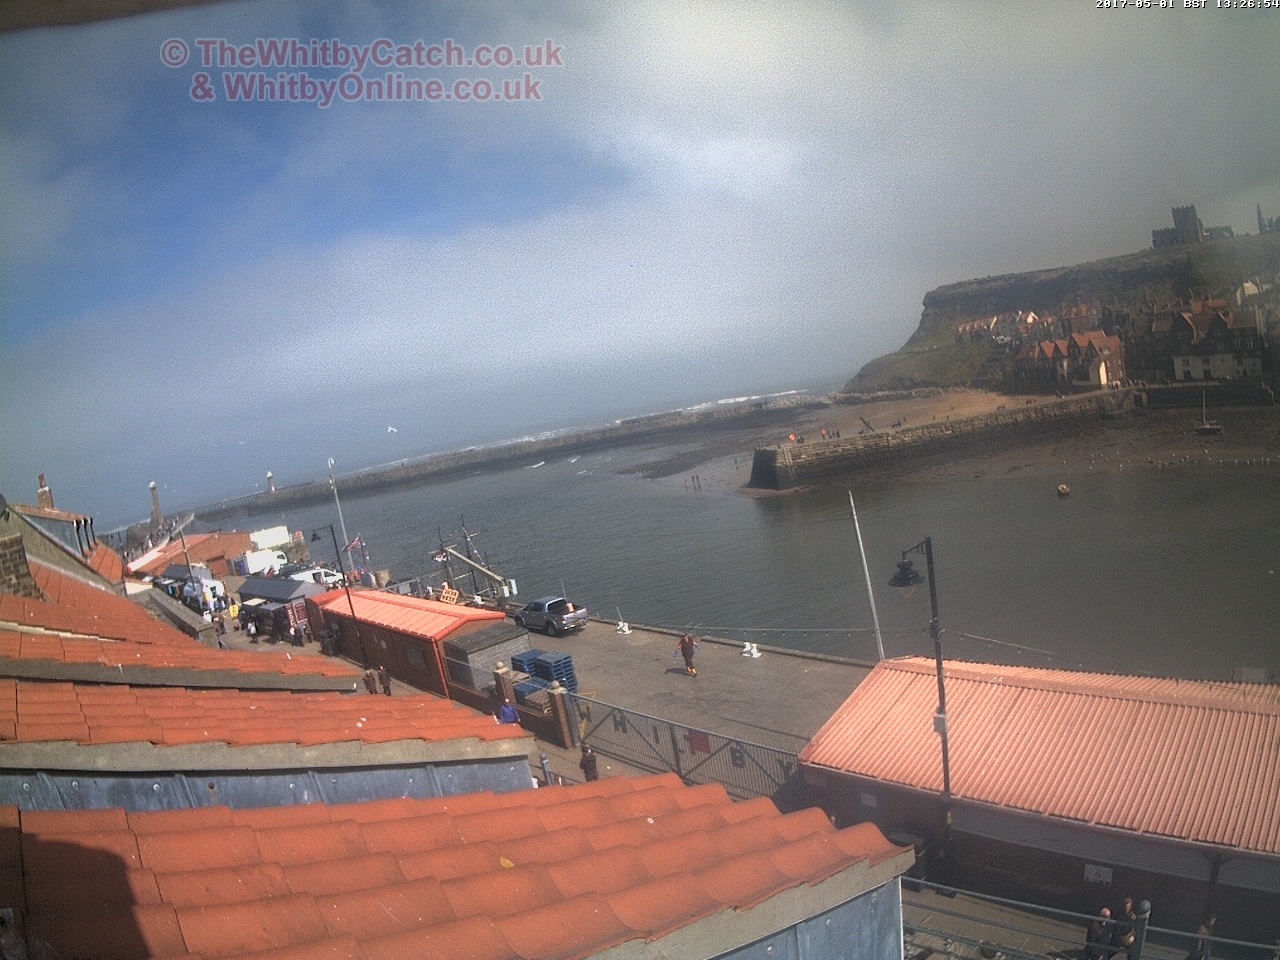 Whitby Mon 1st May 2017 13:27.